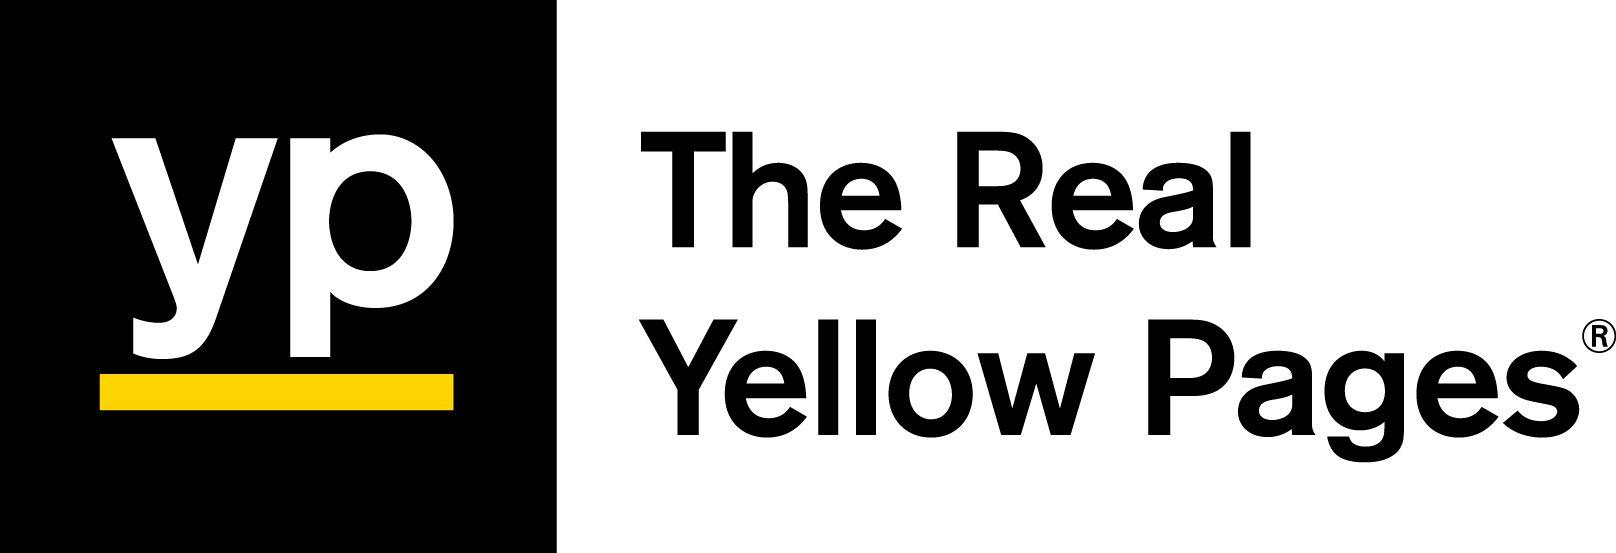 YP Yellow Pages Logo - YP Research Offers Insights on Consumers' Local Search and Spending ...